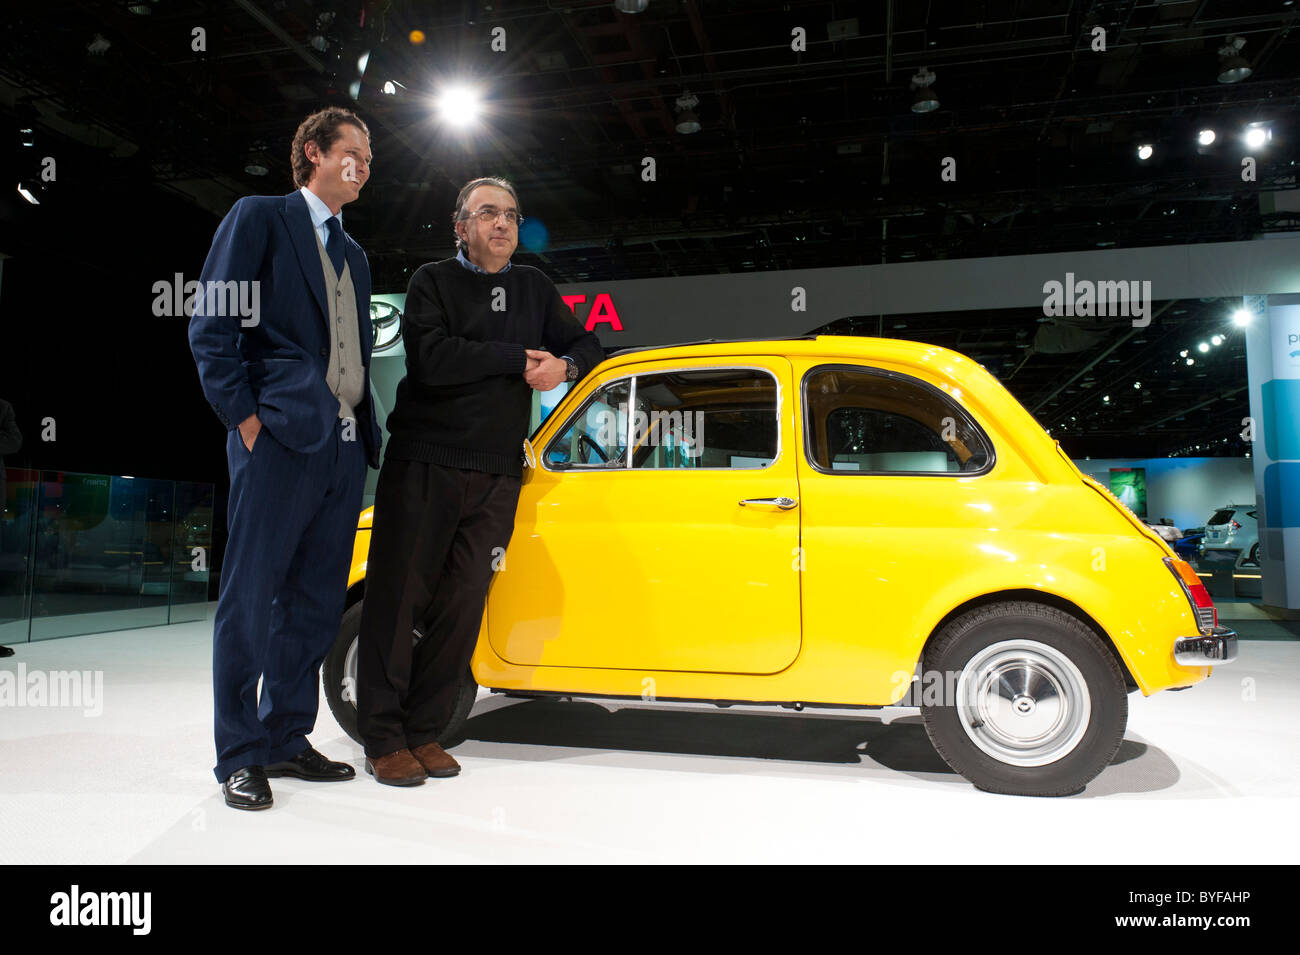 Fiat Chairman John Elkann and Fiat and  Chrysler CEO Sergio Marchionne with a vintage Fiat 500 at NAIAS 2011 in Detroit Stock Photo